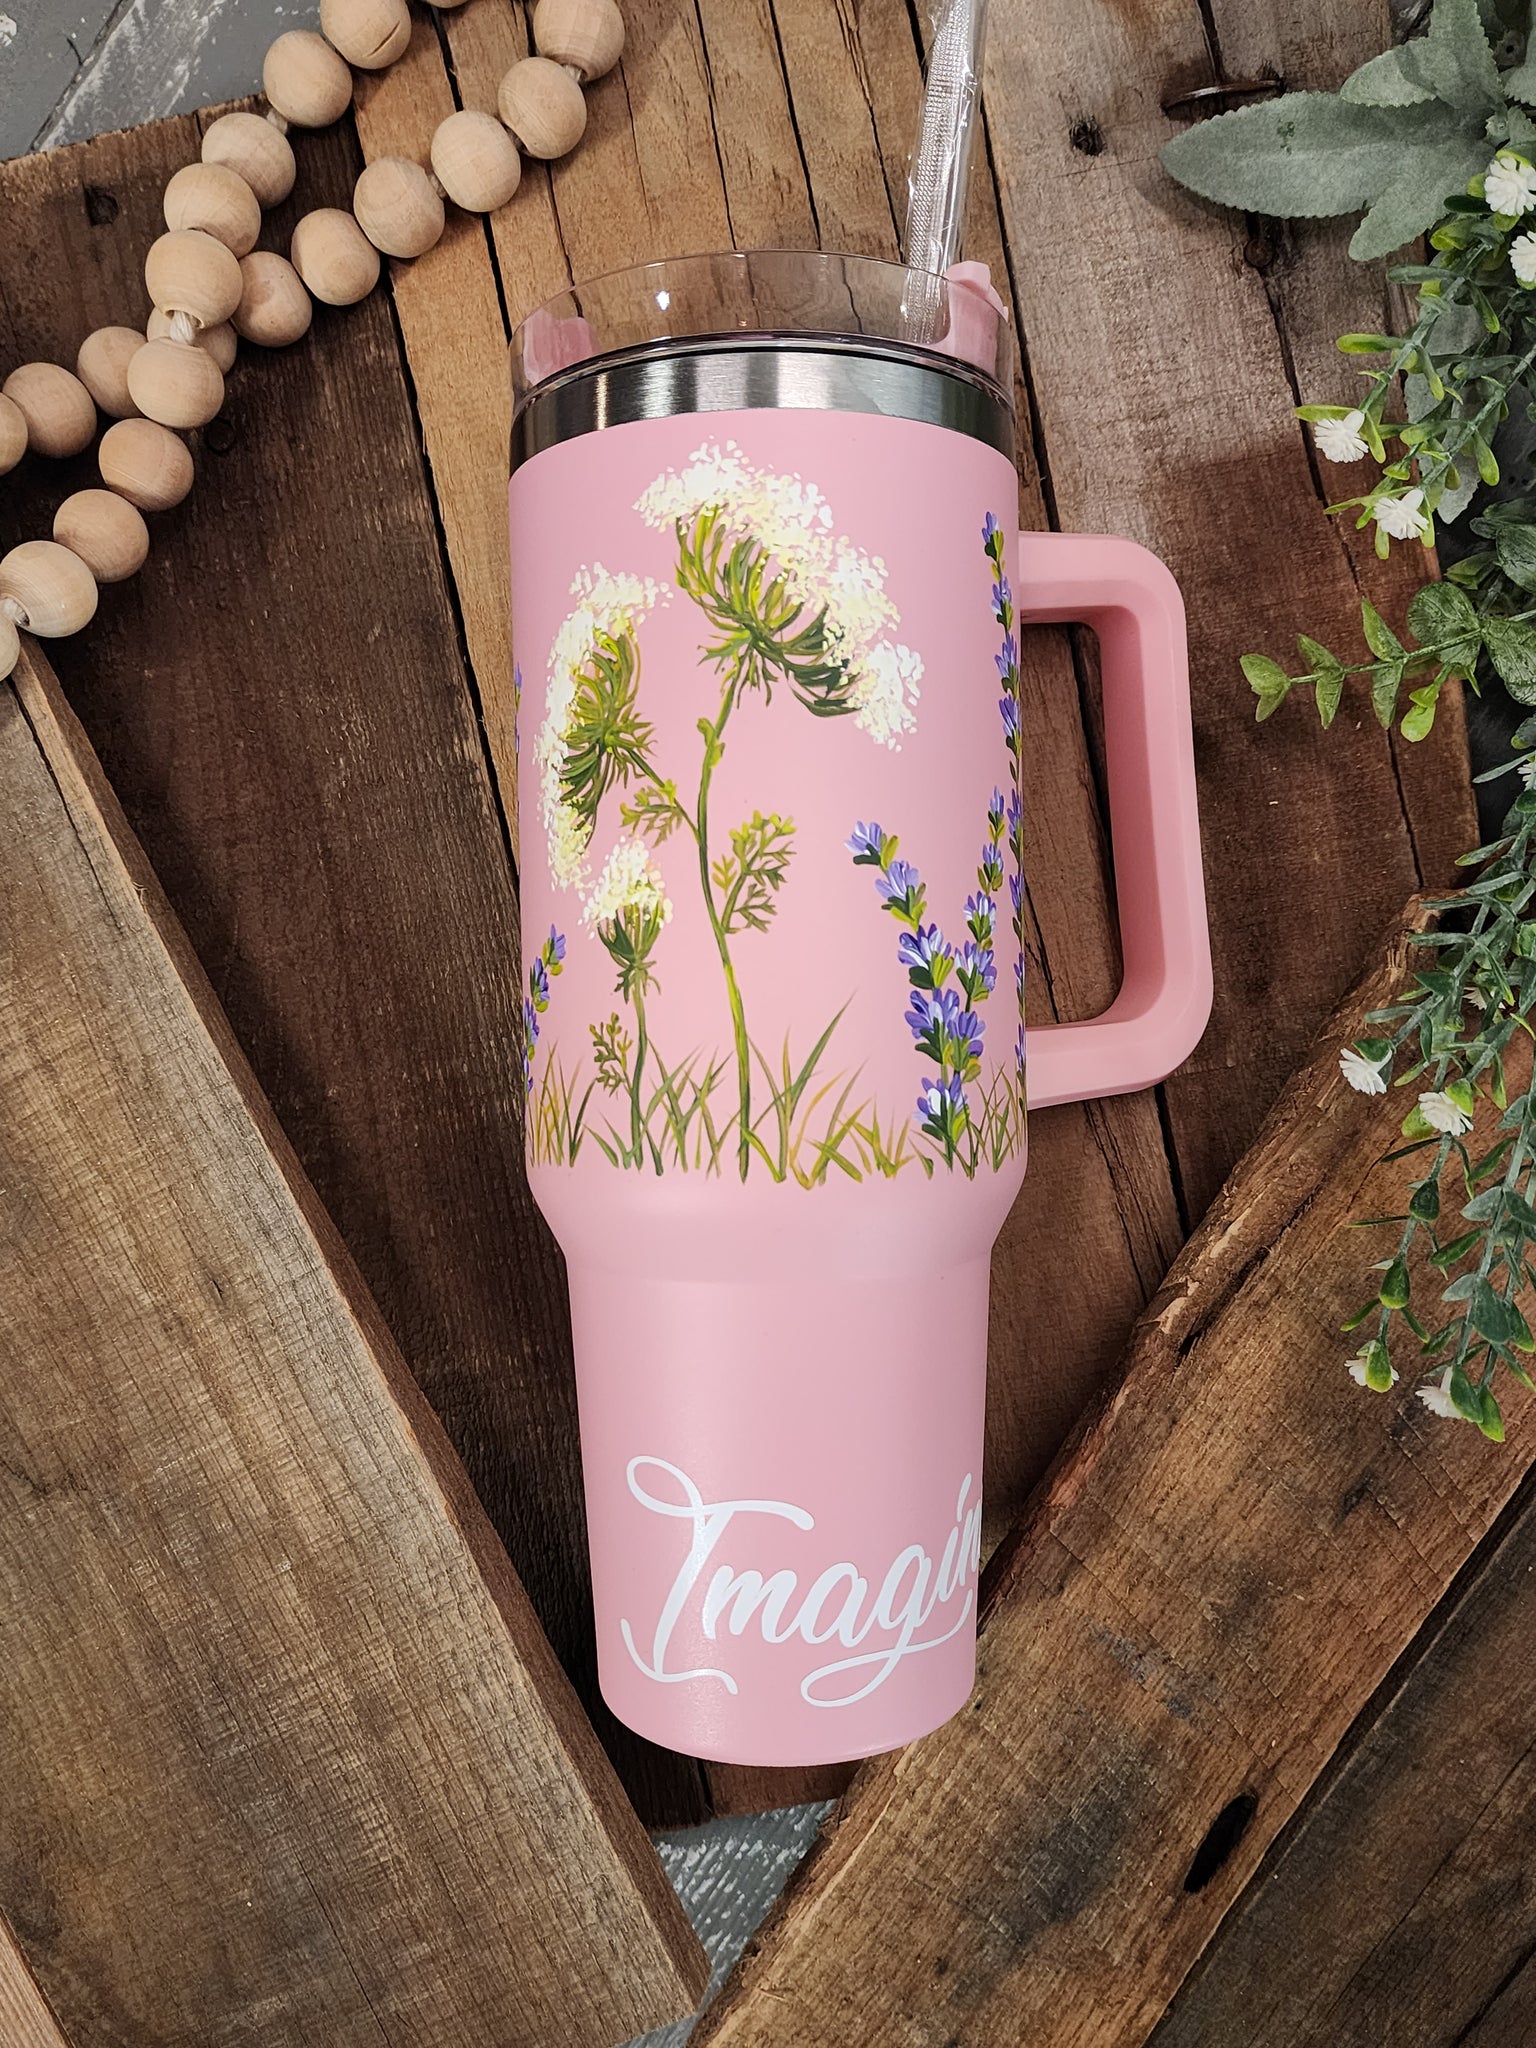 White 40oz tumbler with painted sunflowers, Women's Christmas Gift